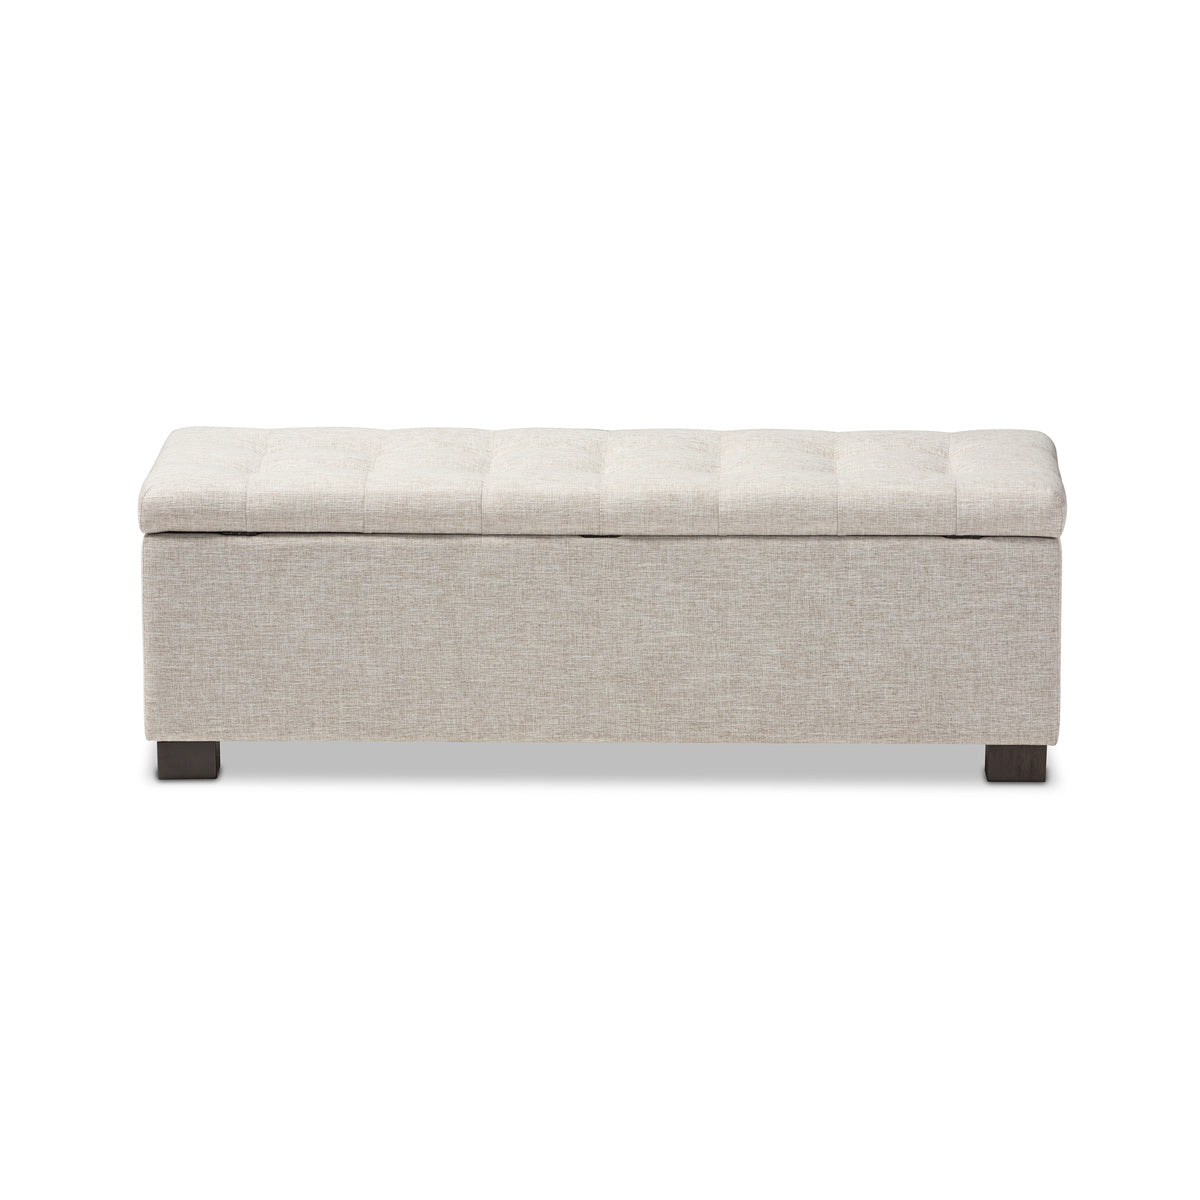 Baxton Studio Roanoke Modern and Contemporary Beige Fabric Upholstered Grid-Tufting Storage Ottoman Bench Baxton Studio-benches-Minimal And Modern - 6